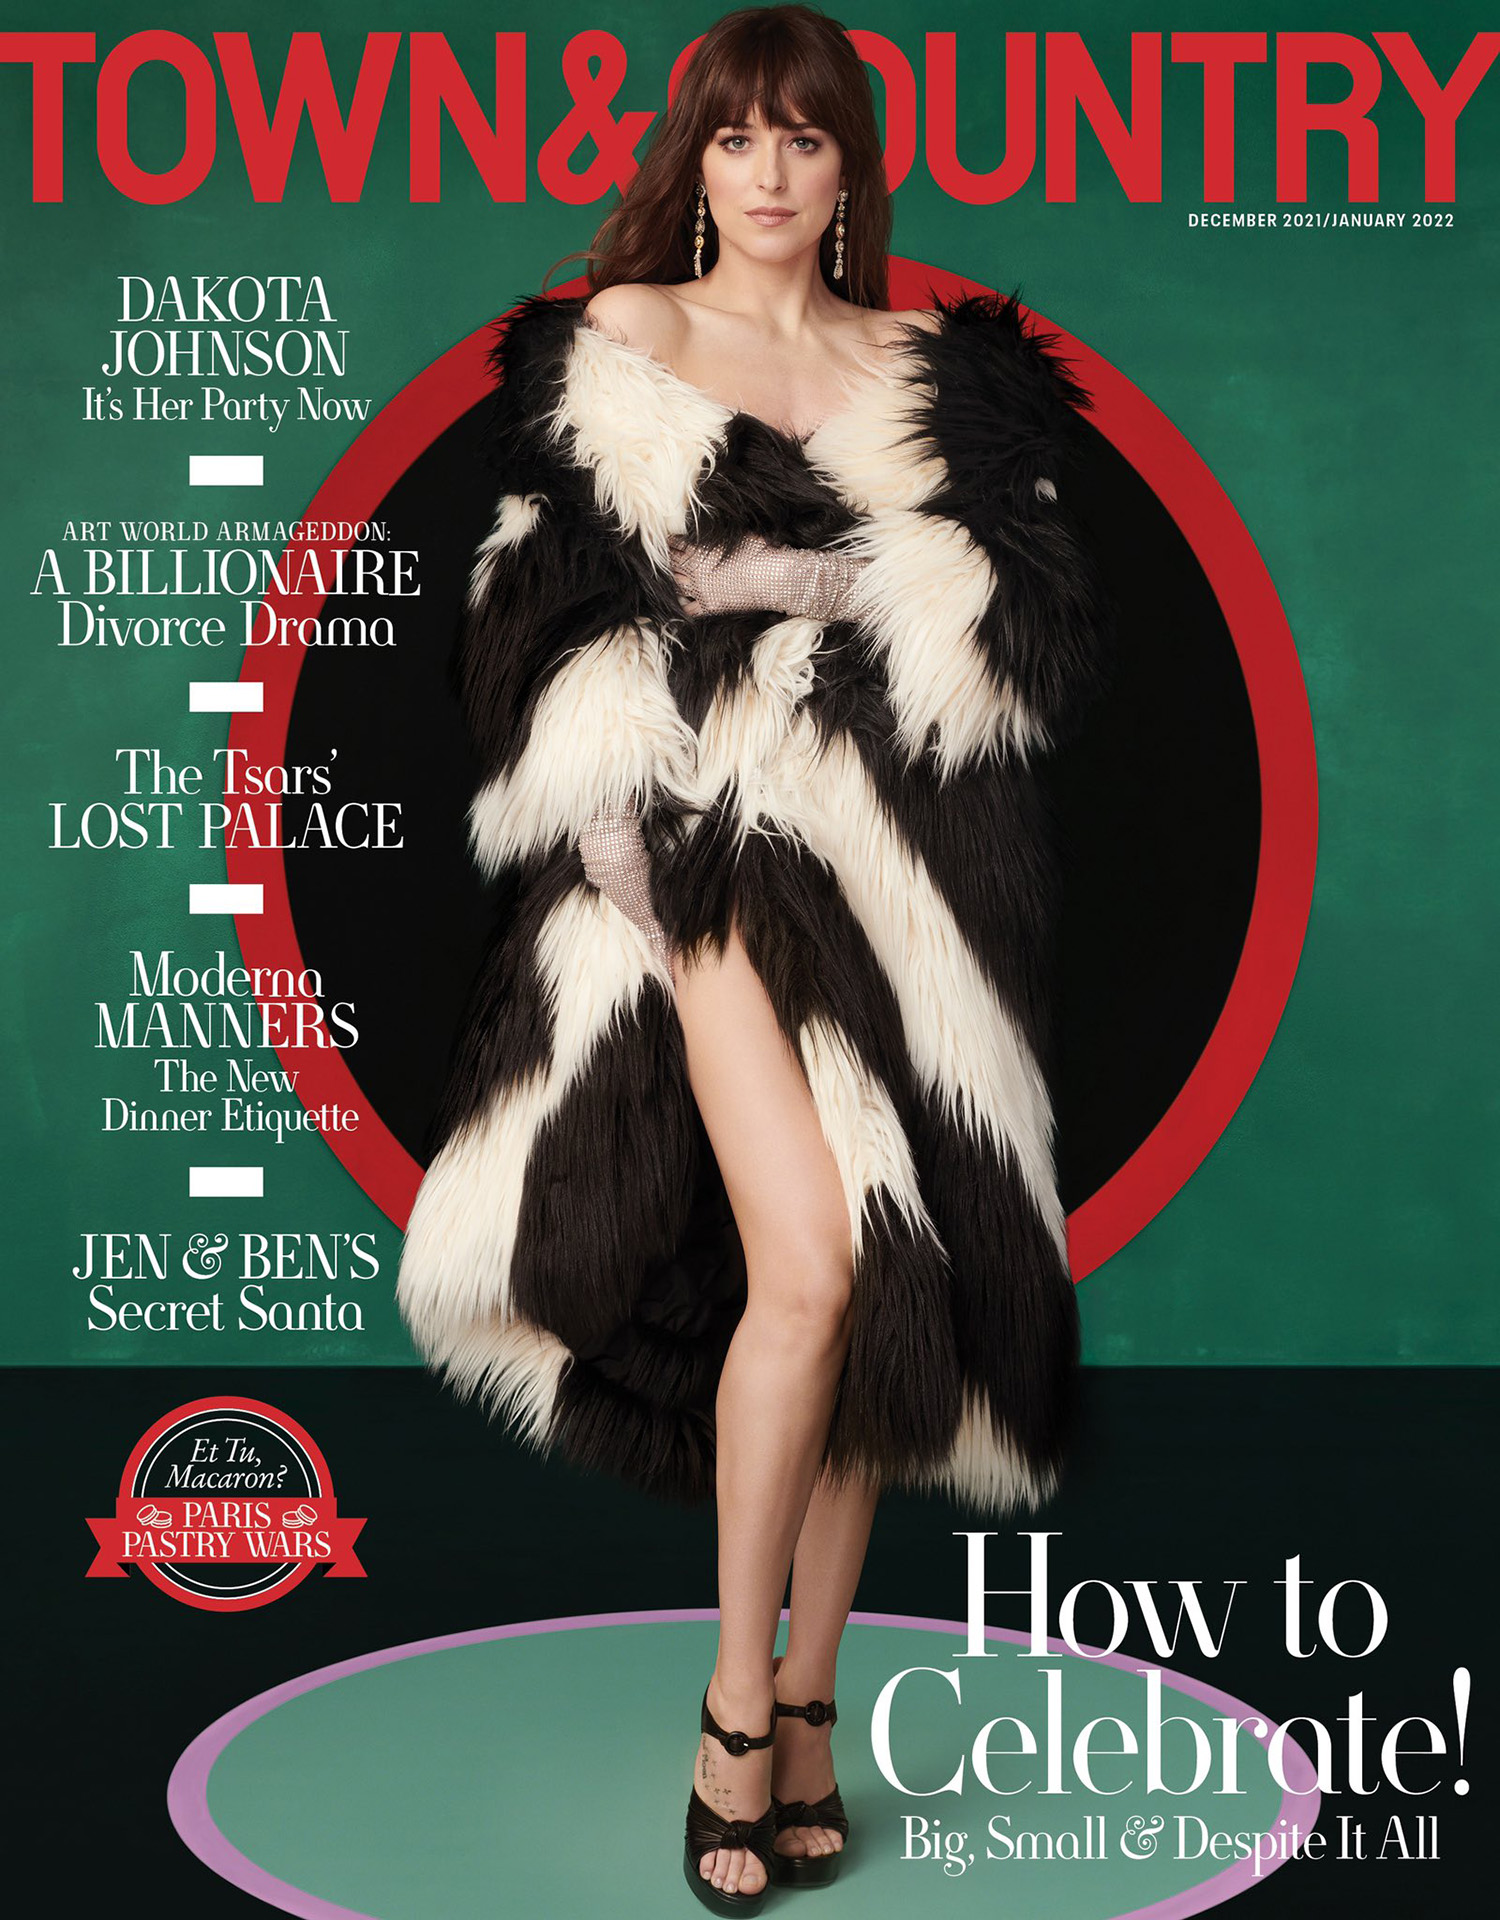 Dakota Johnson in Gucci on Town & Country December 2021 January 2022 cover by Amanda Demme